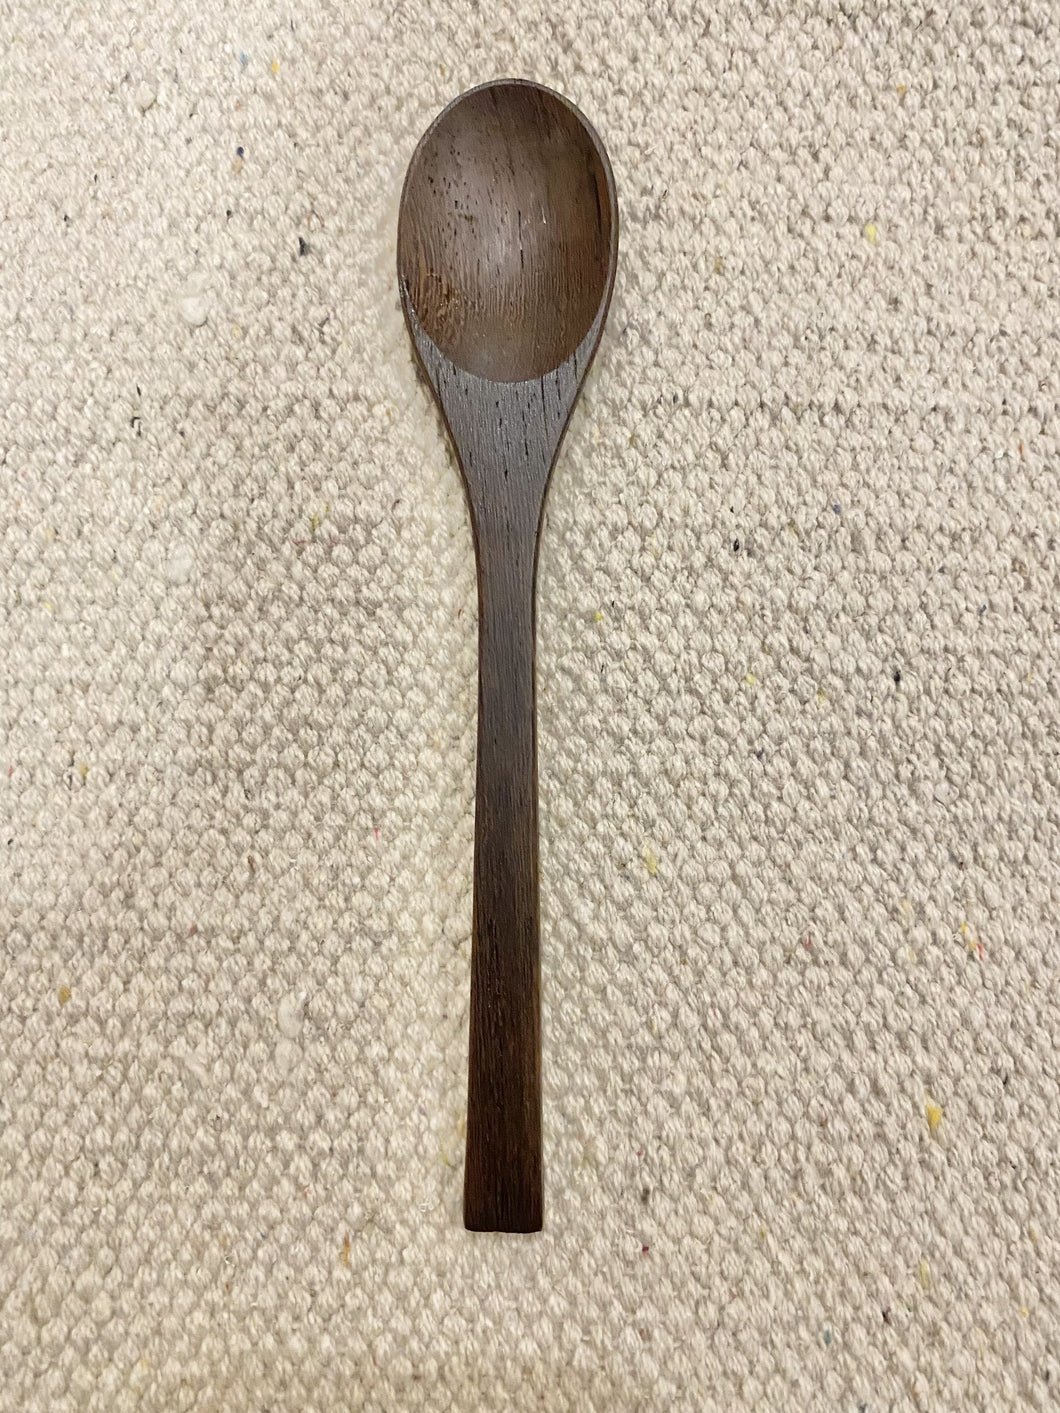 Recycled Wooden Spoon